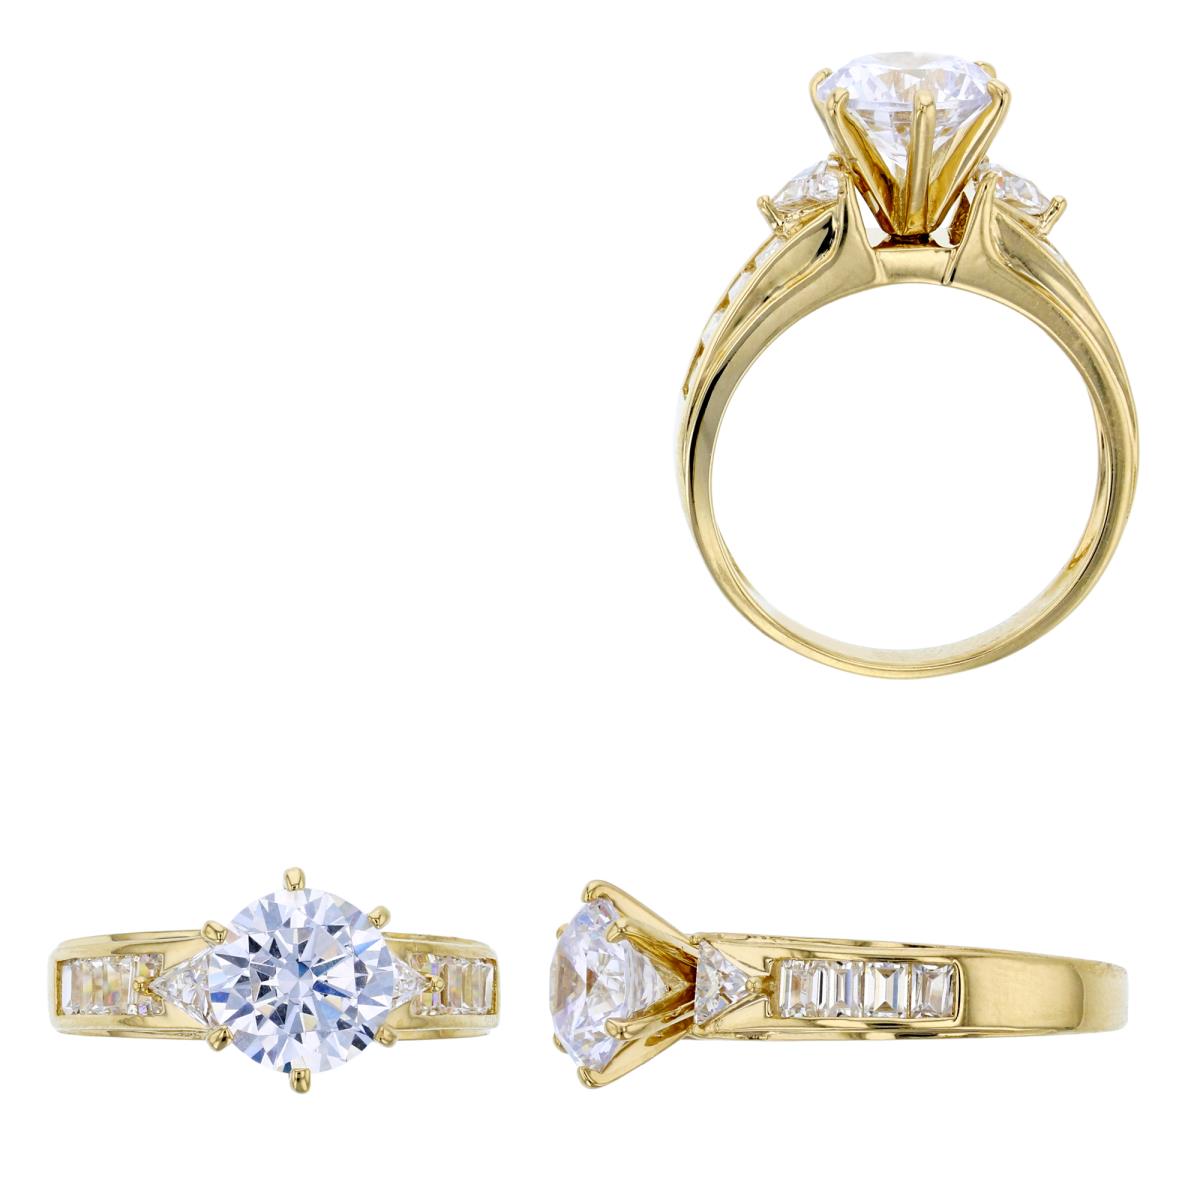 10K Yellow Gold 8mm Round Cut Prong Set Triangle & Baguette Side Stones Engagement Ring